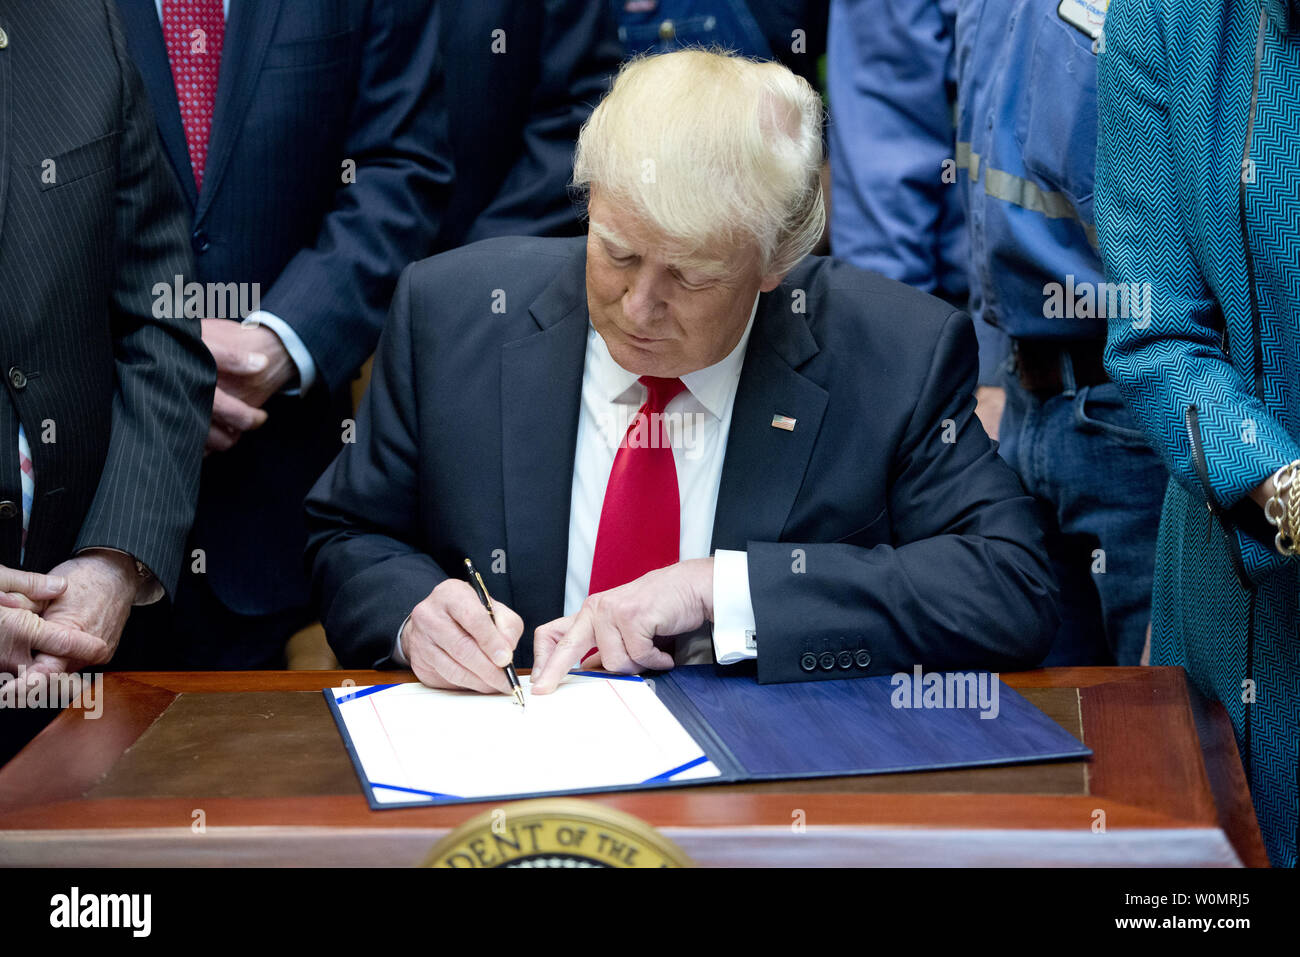 United States President Donald J. Trump signs H.J. Res. 38, disapproving the rule submitted by the US Department of the Interior known as the Stream Protection Rule in the Roosevelt Room of the White House in Washington, DC on February 16, 2017.  The Department of Interior's Stream Protection Rule, which was signed during the final month of the Obama administration, "addresses the impacts of surface coal mining operations on surface water, groundwater, and the productivity of mining operation sites," according to the Congress.gov summary of the resolution..Credit: Ron Sachs / Pool via CNP Stock Photo